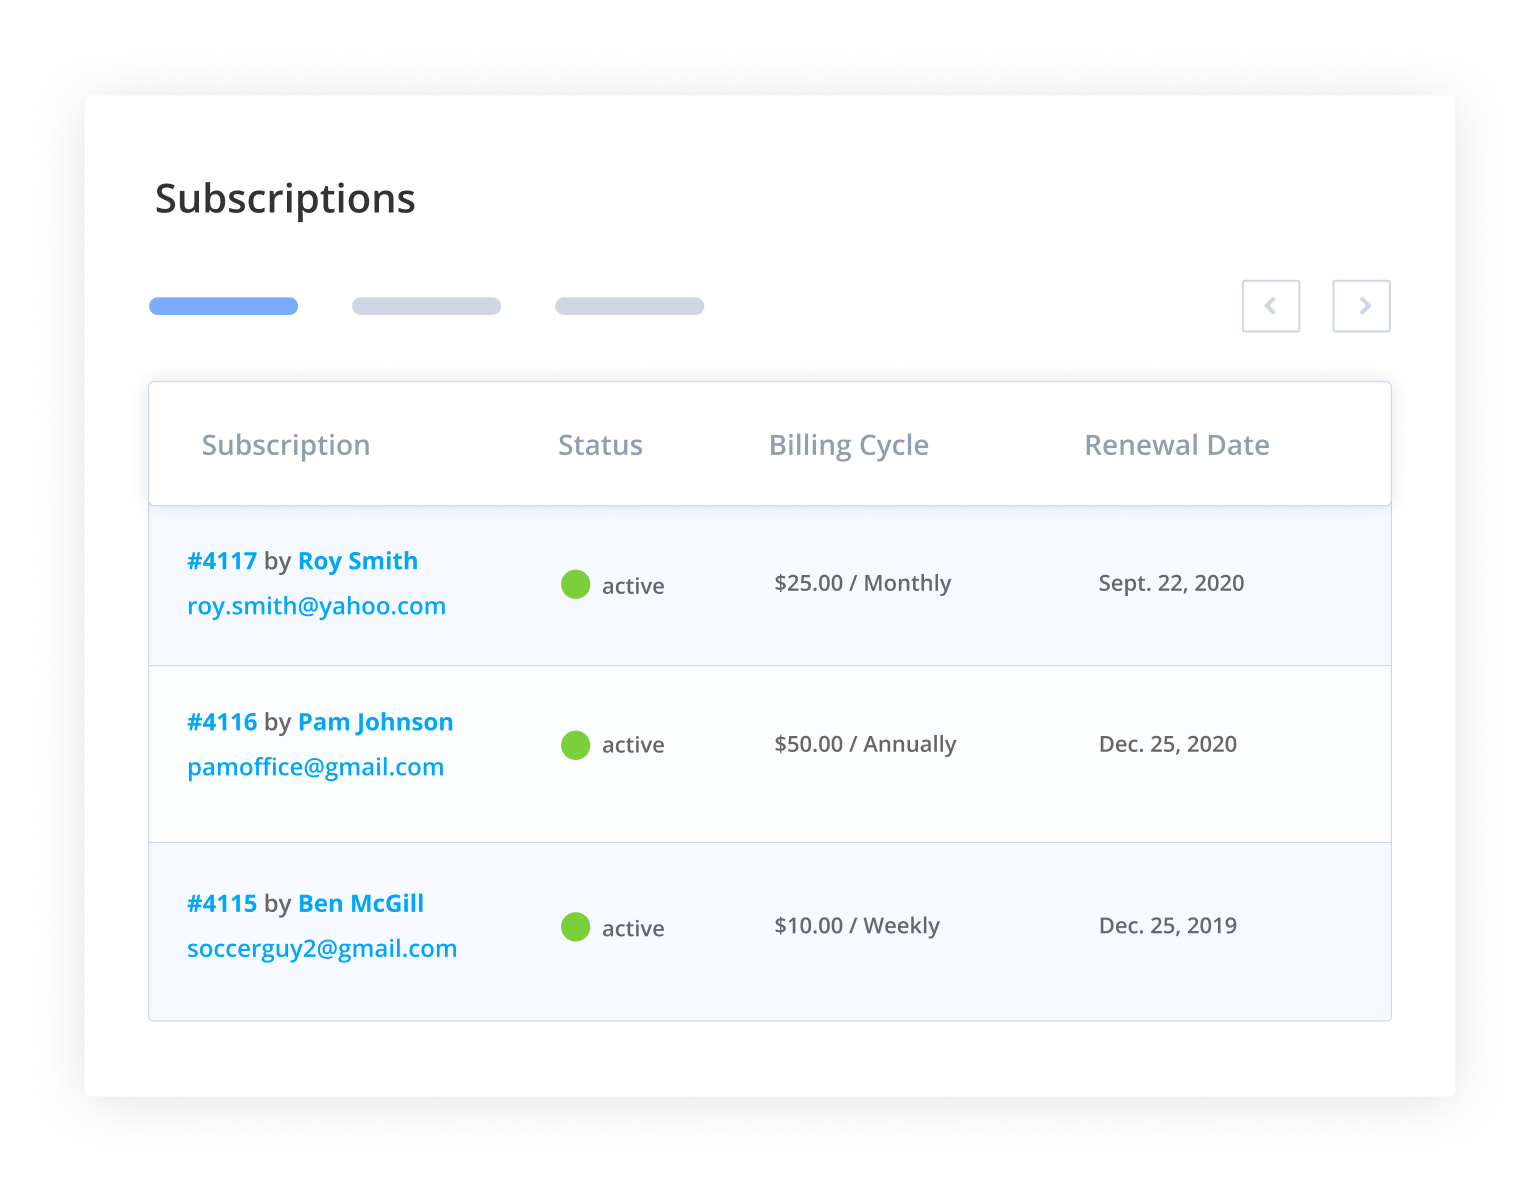 Your subscription dashboard shows you the donor contact information, status of their subscription donations.